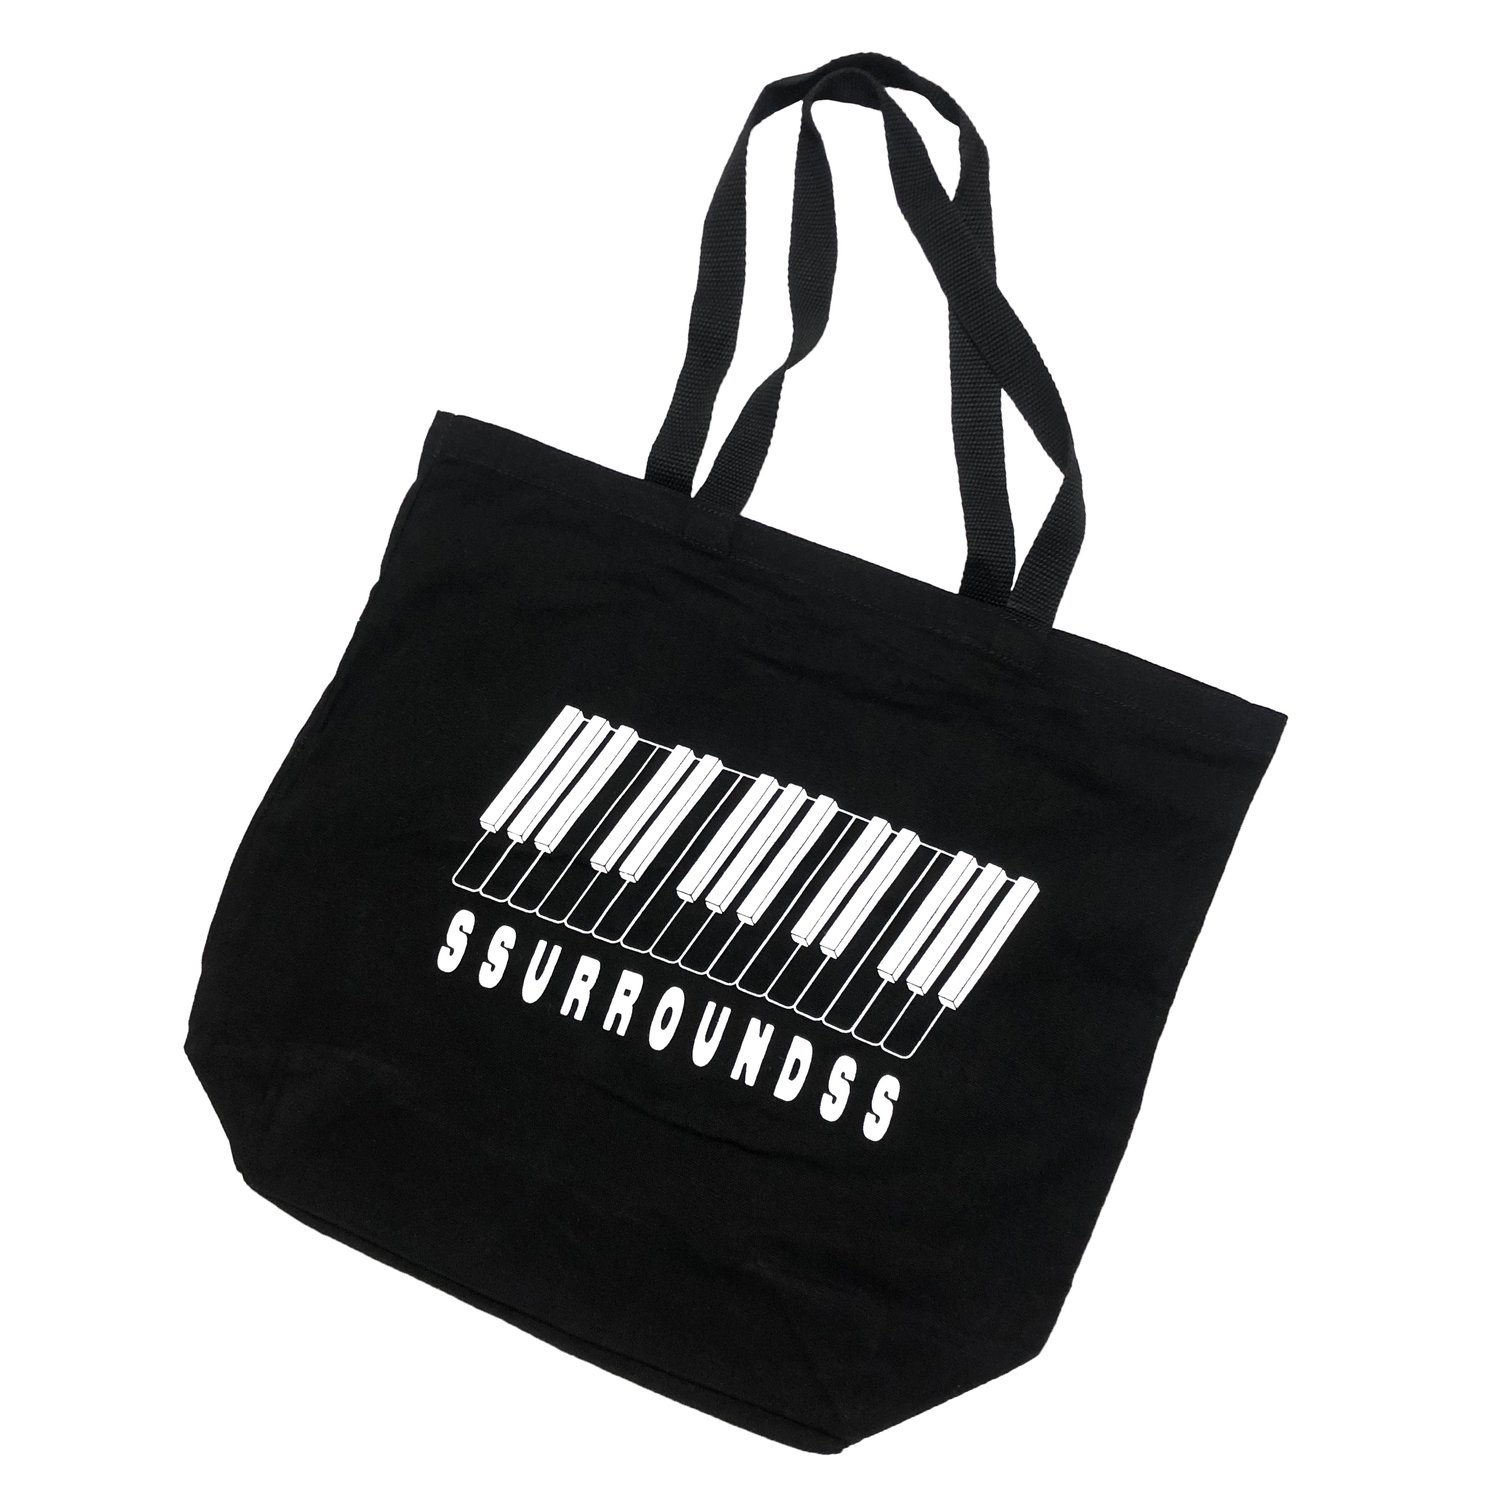 SSURROUNDSS Label Tote